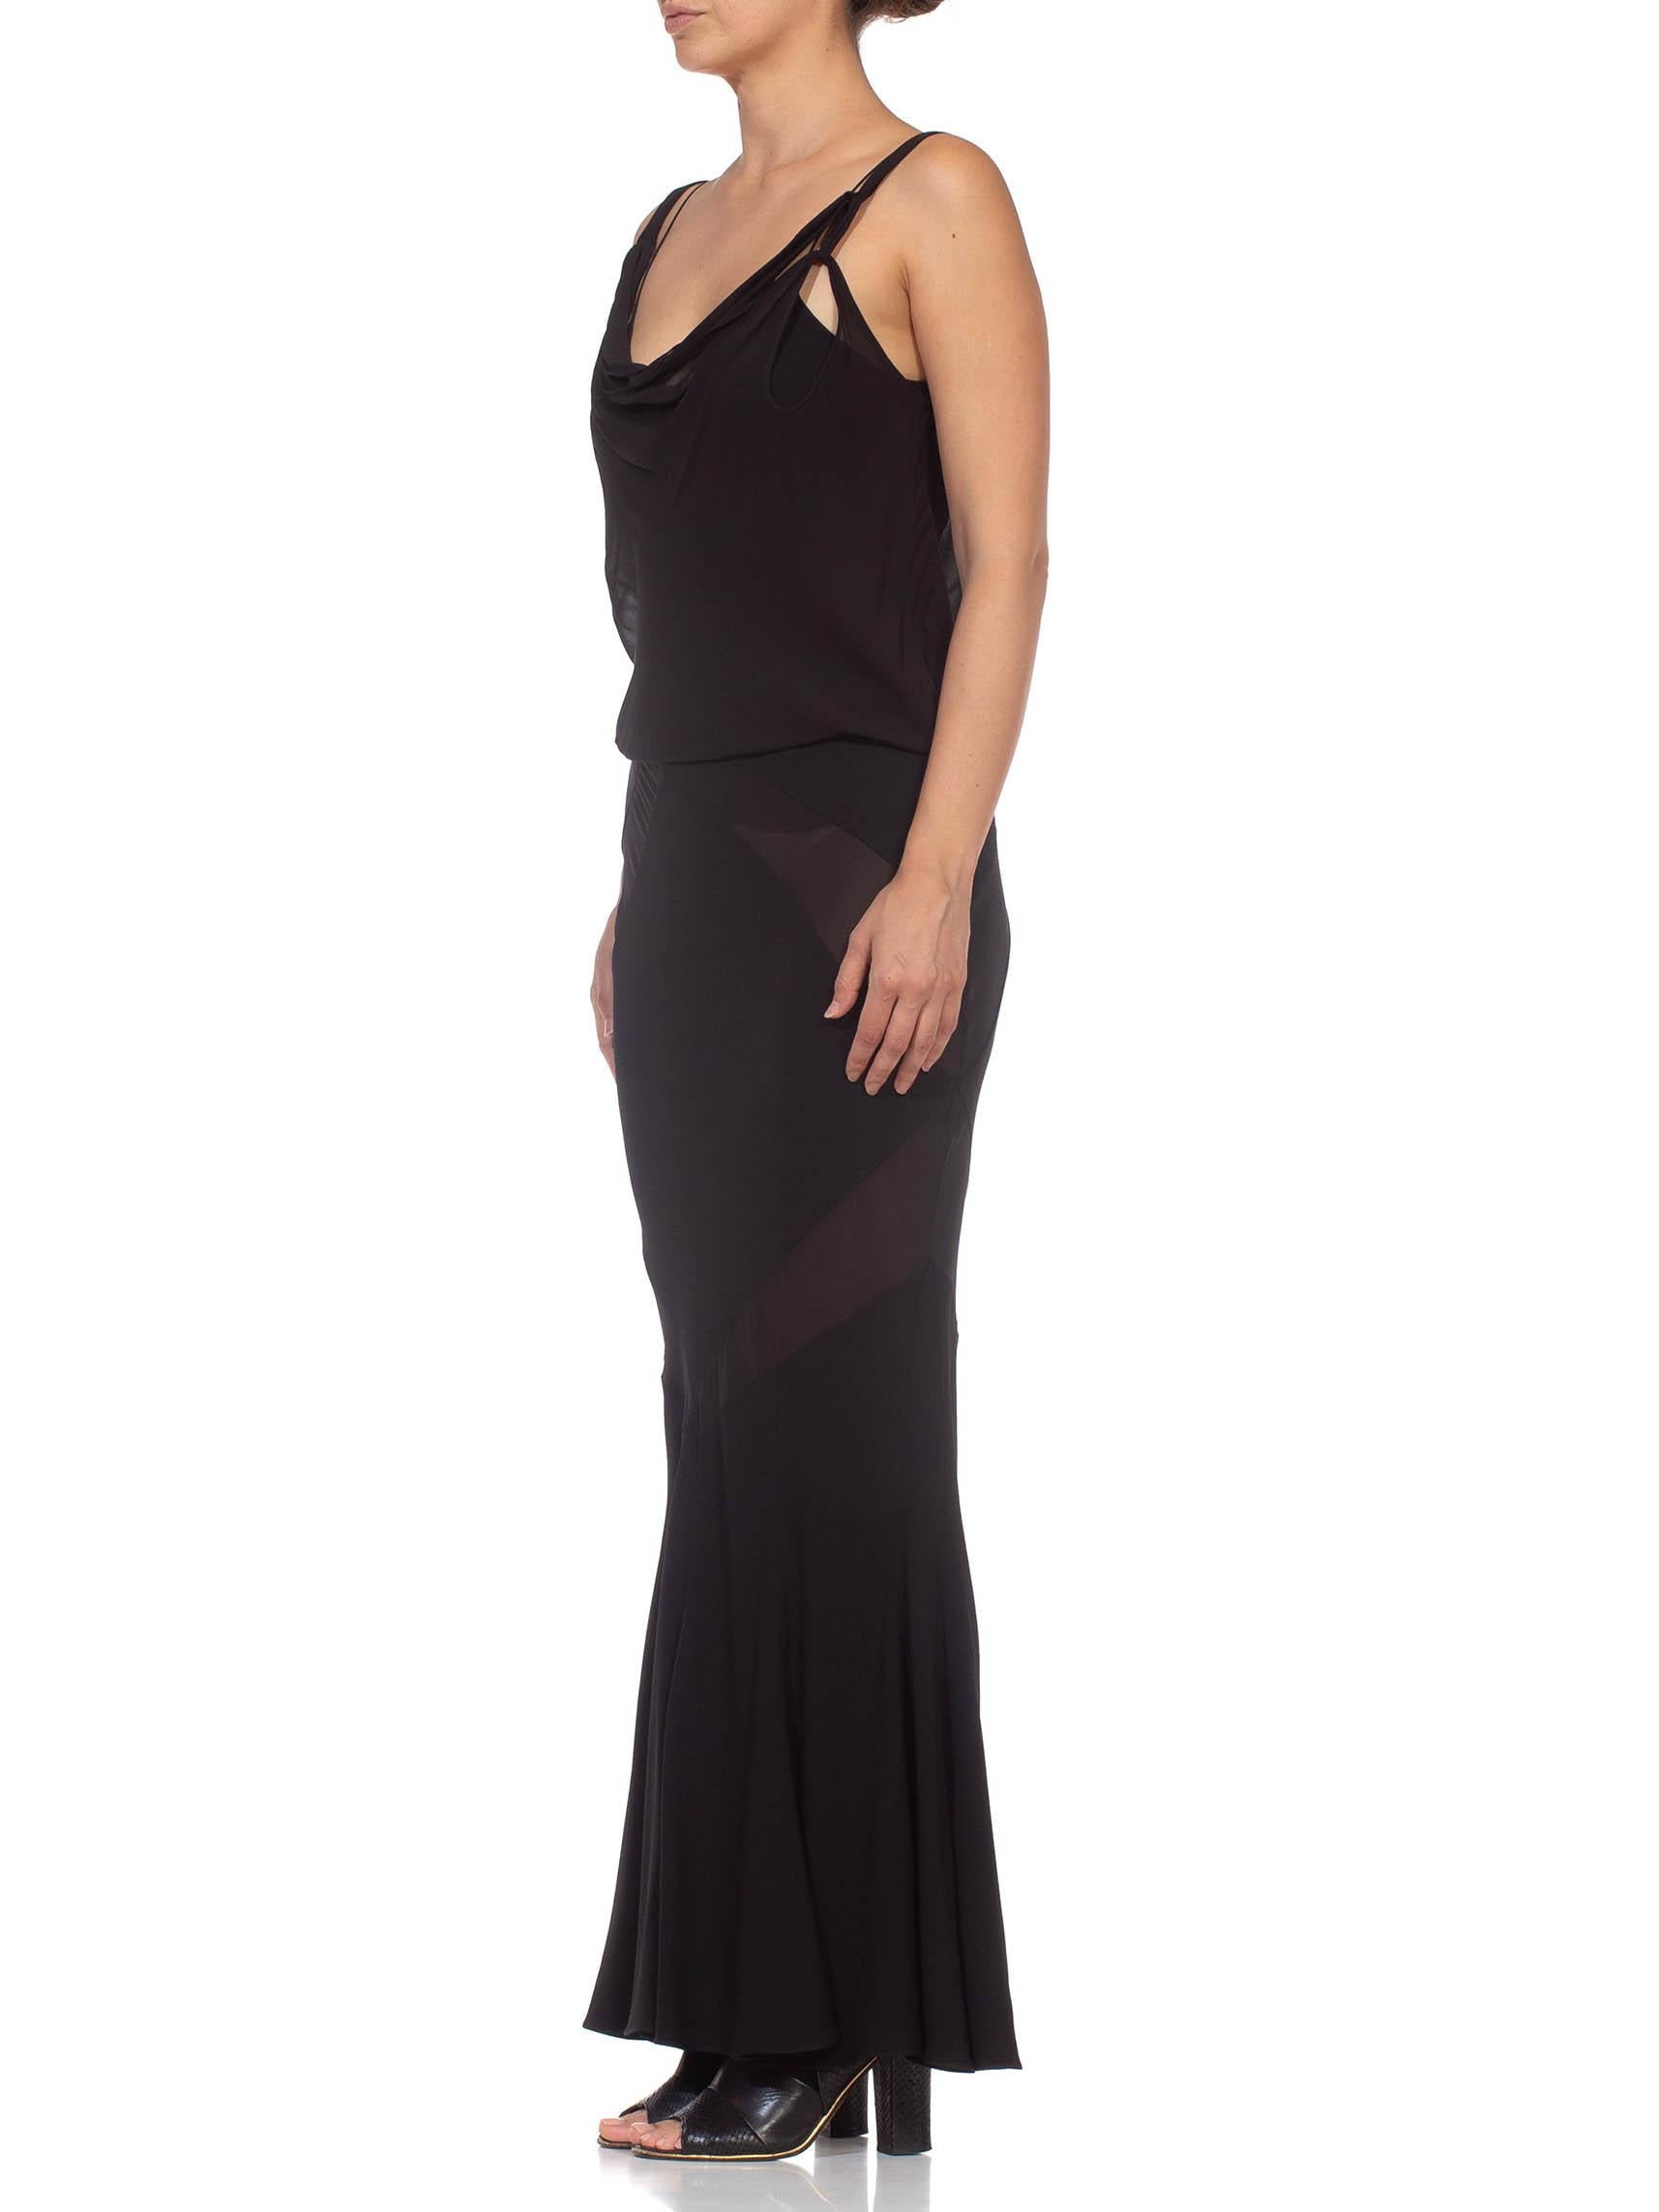 1990S JOHN GALLIANO Black Bias Cut Rayon & Silk Crepe Chiffon Gown In Excellent Condition For Sale In New York, NY